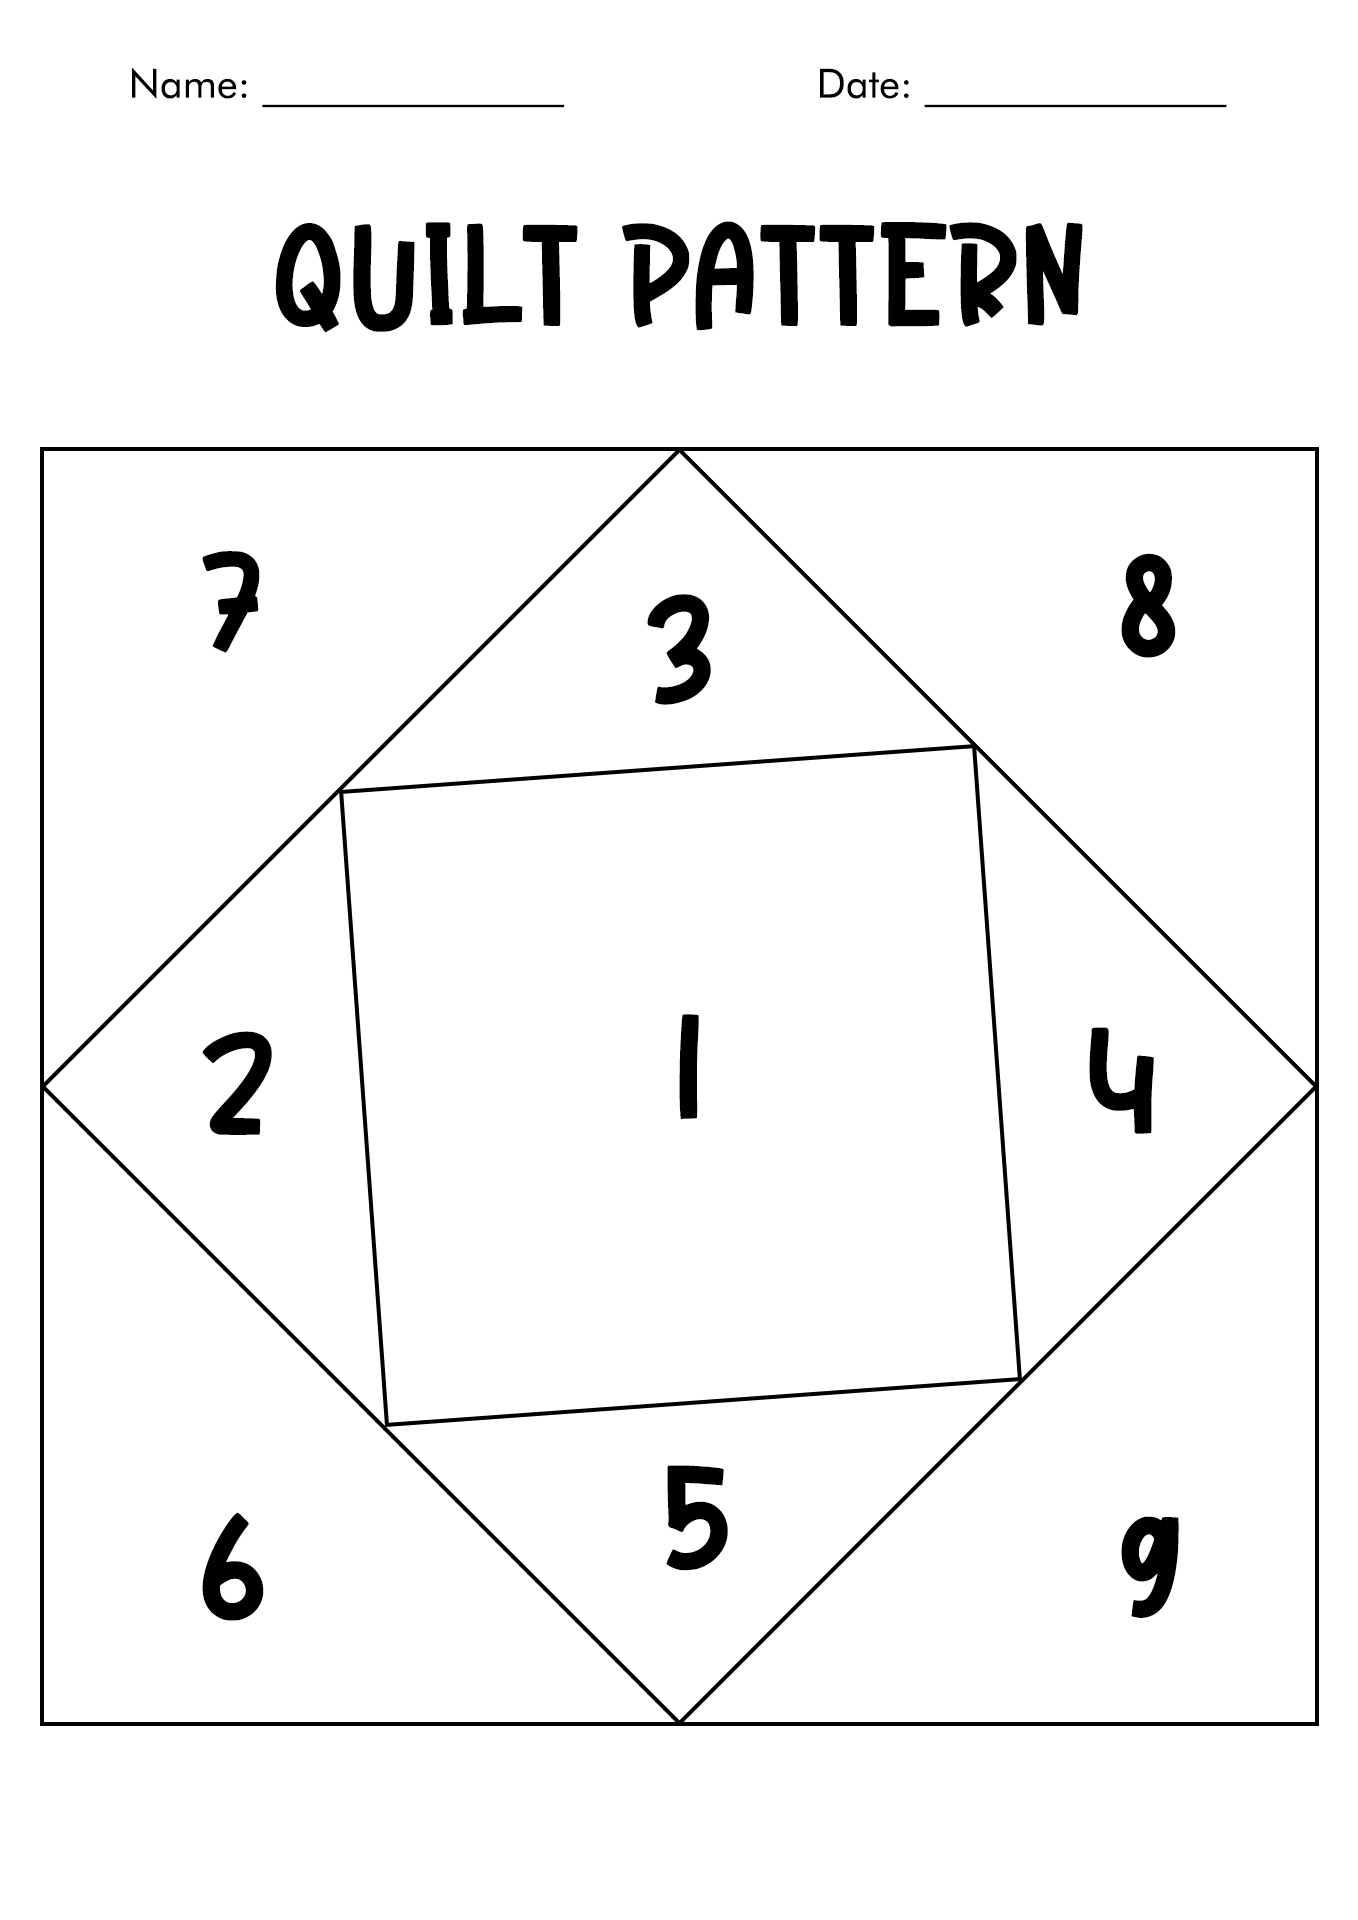 quilt-patterns-free-printable-quilt-block-quilting-patterns-printable